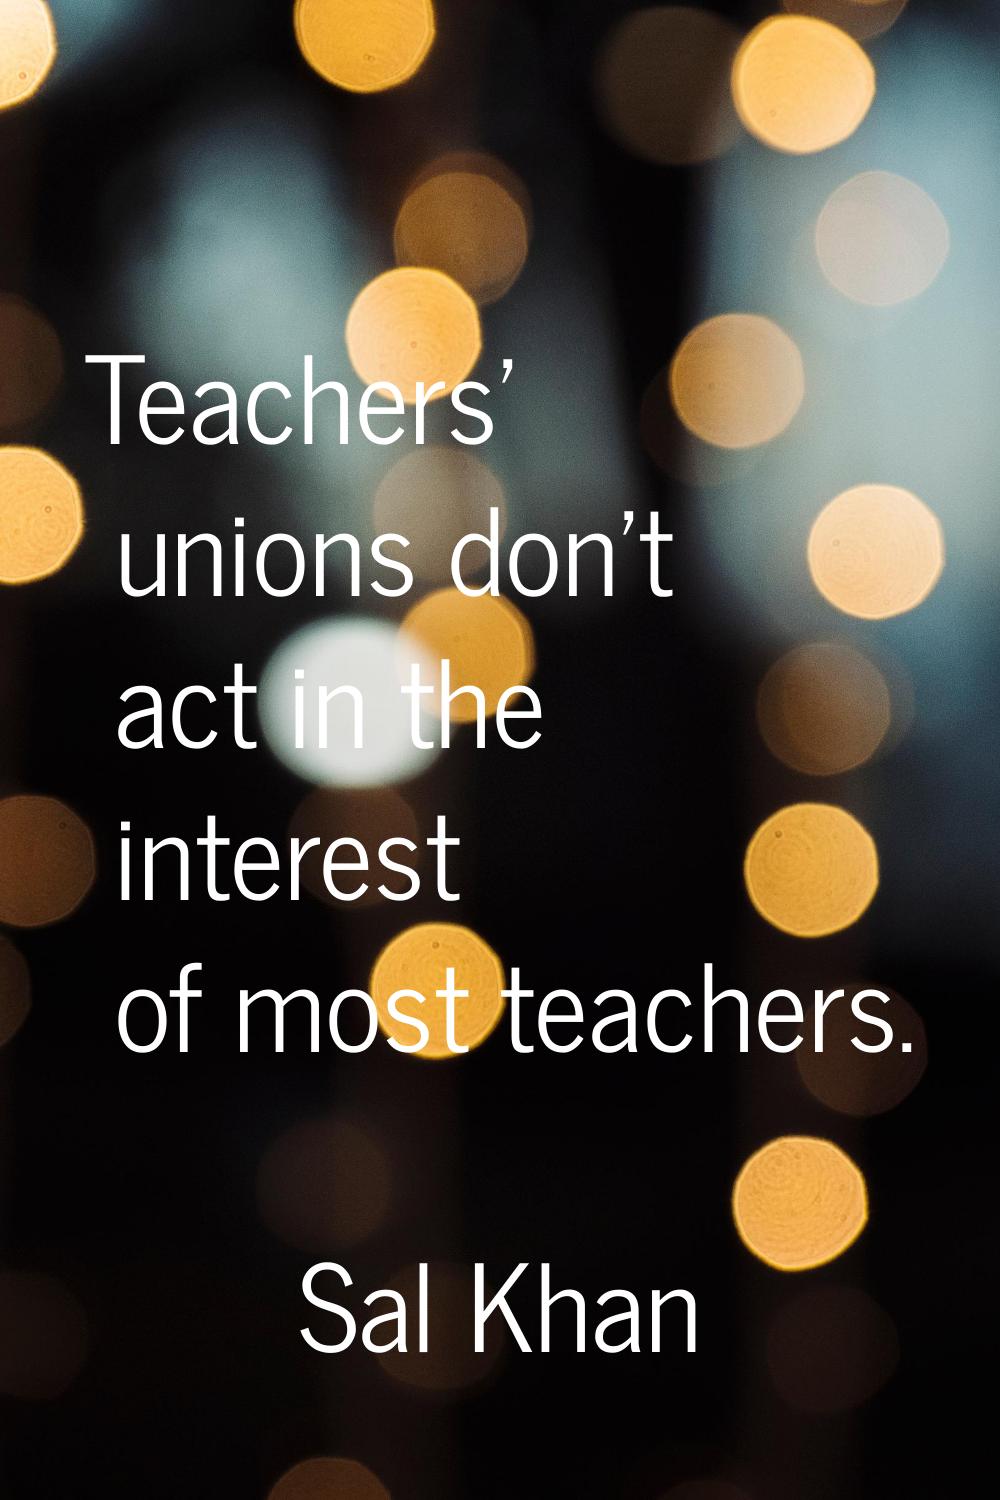 Teachers' unions don't act in the interest of most teachers.